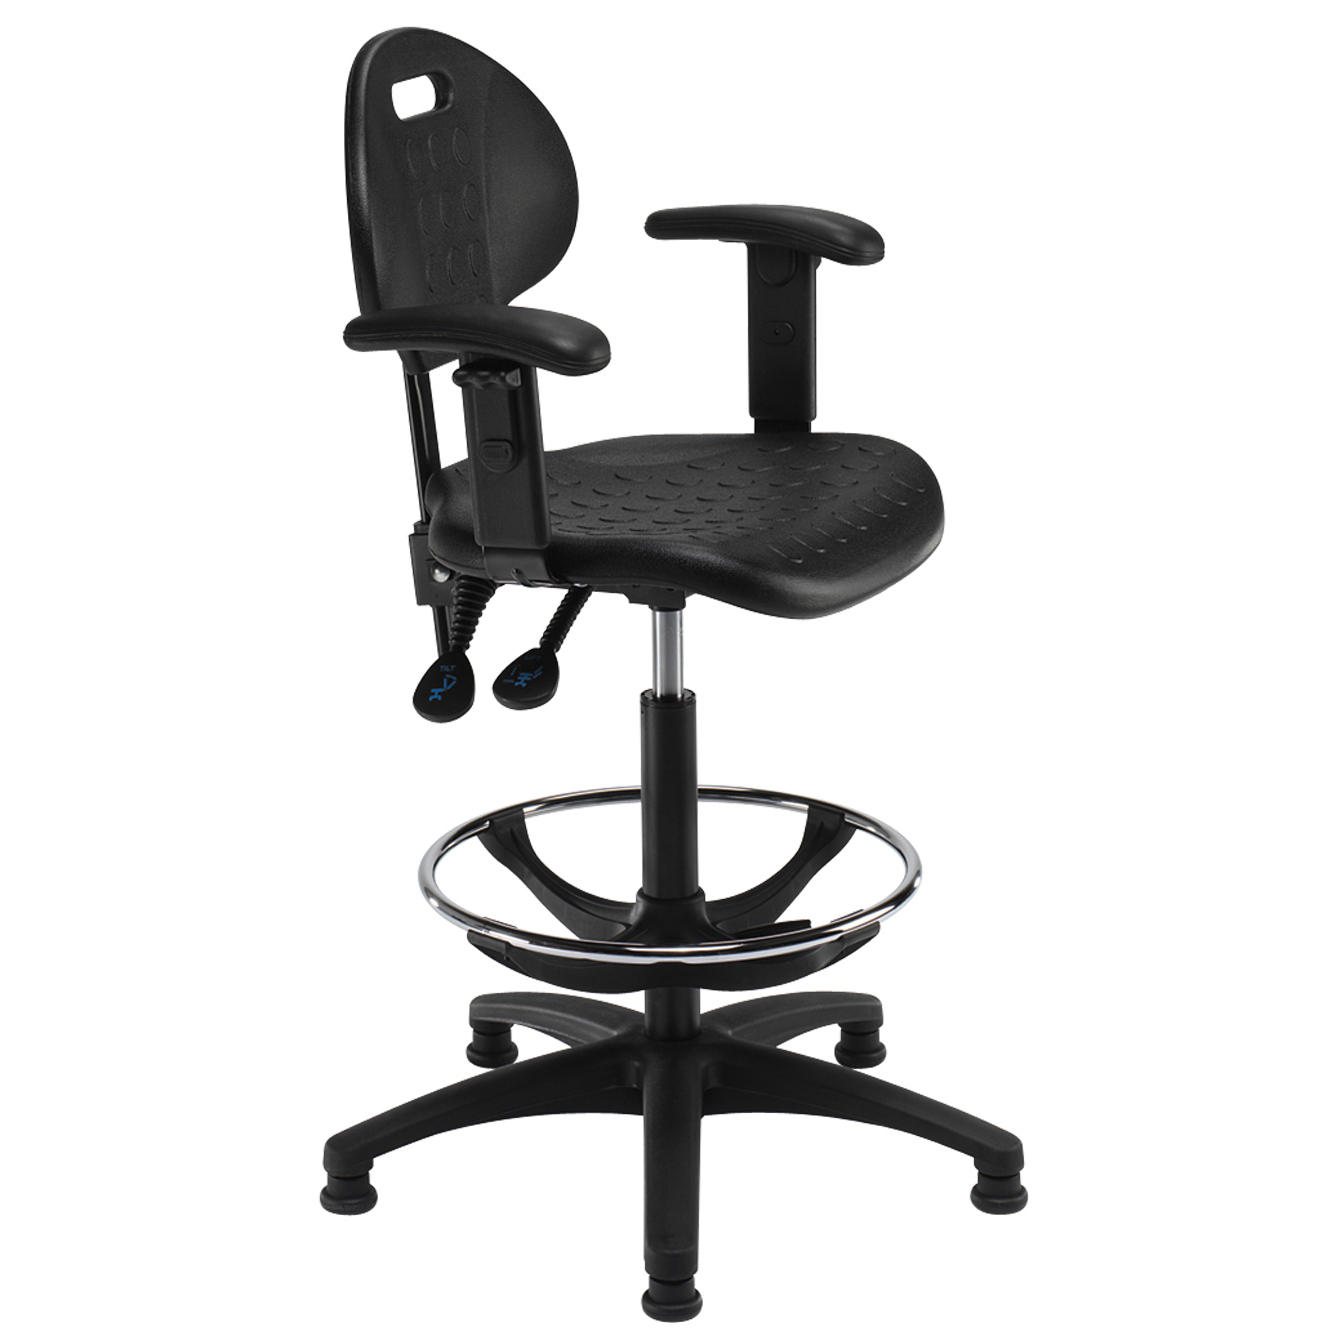 Industrial draughtsman chair with arms | HSI Office Furniture | Reading